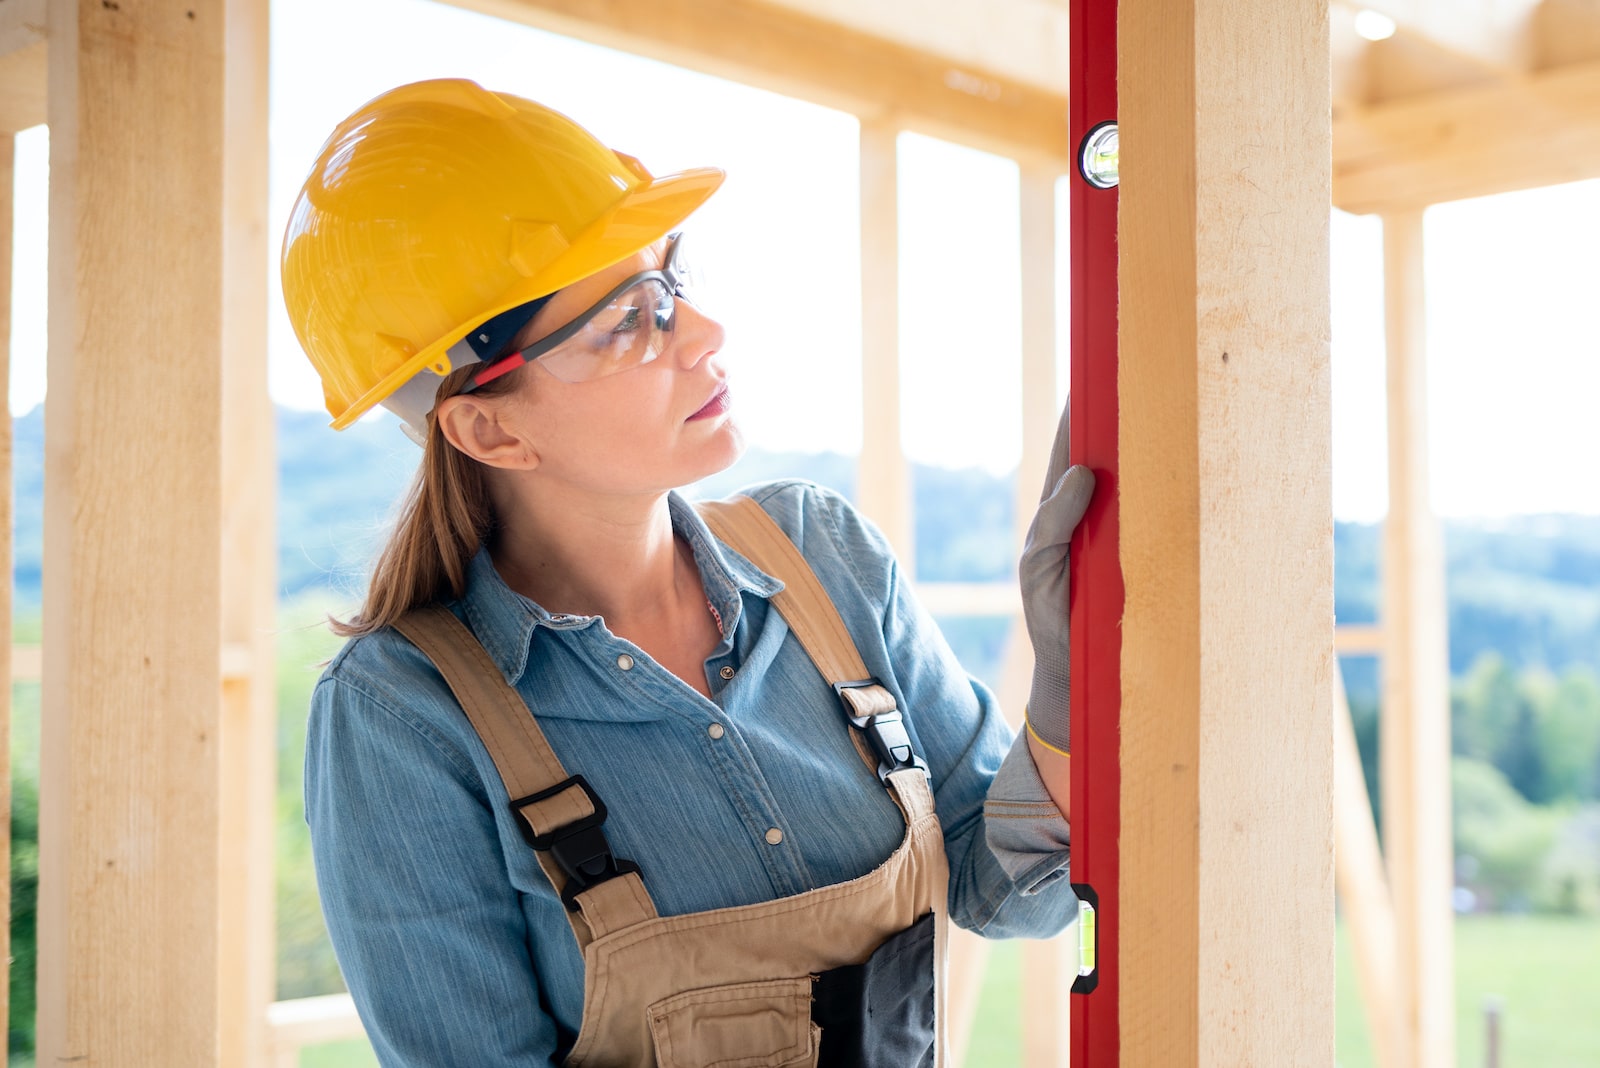 Women with hard hat and carpeter's level